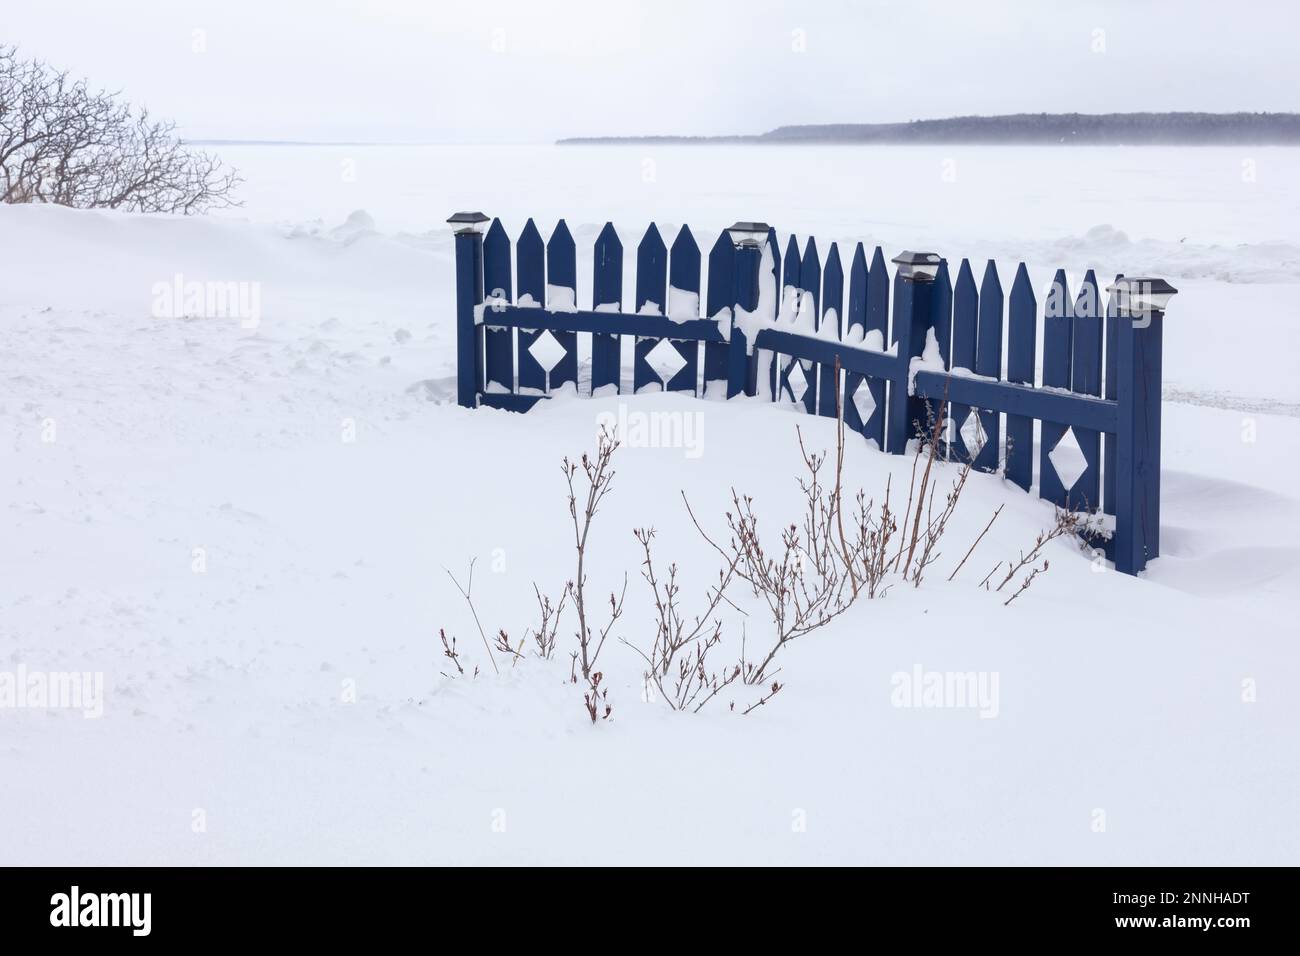 The front yard fence shows up vividly against the snowy wasteland of Manitoulin Island, Ontario. Stock Photo